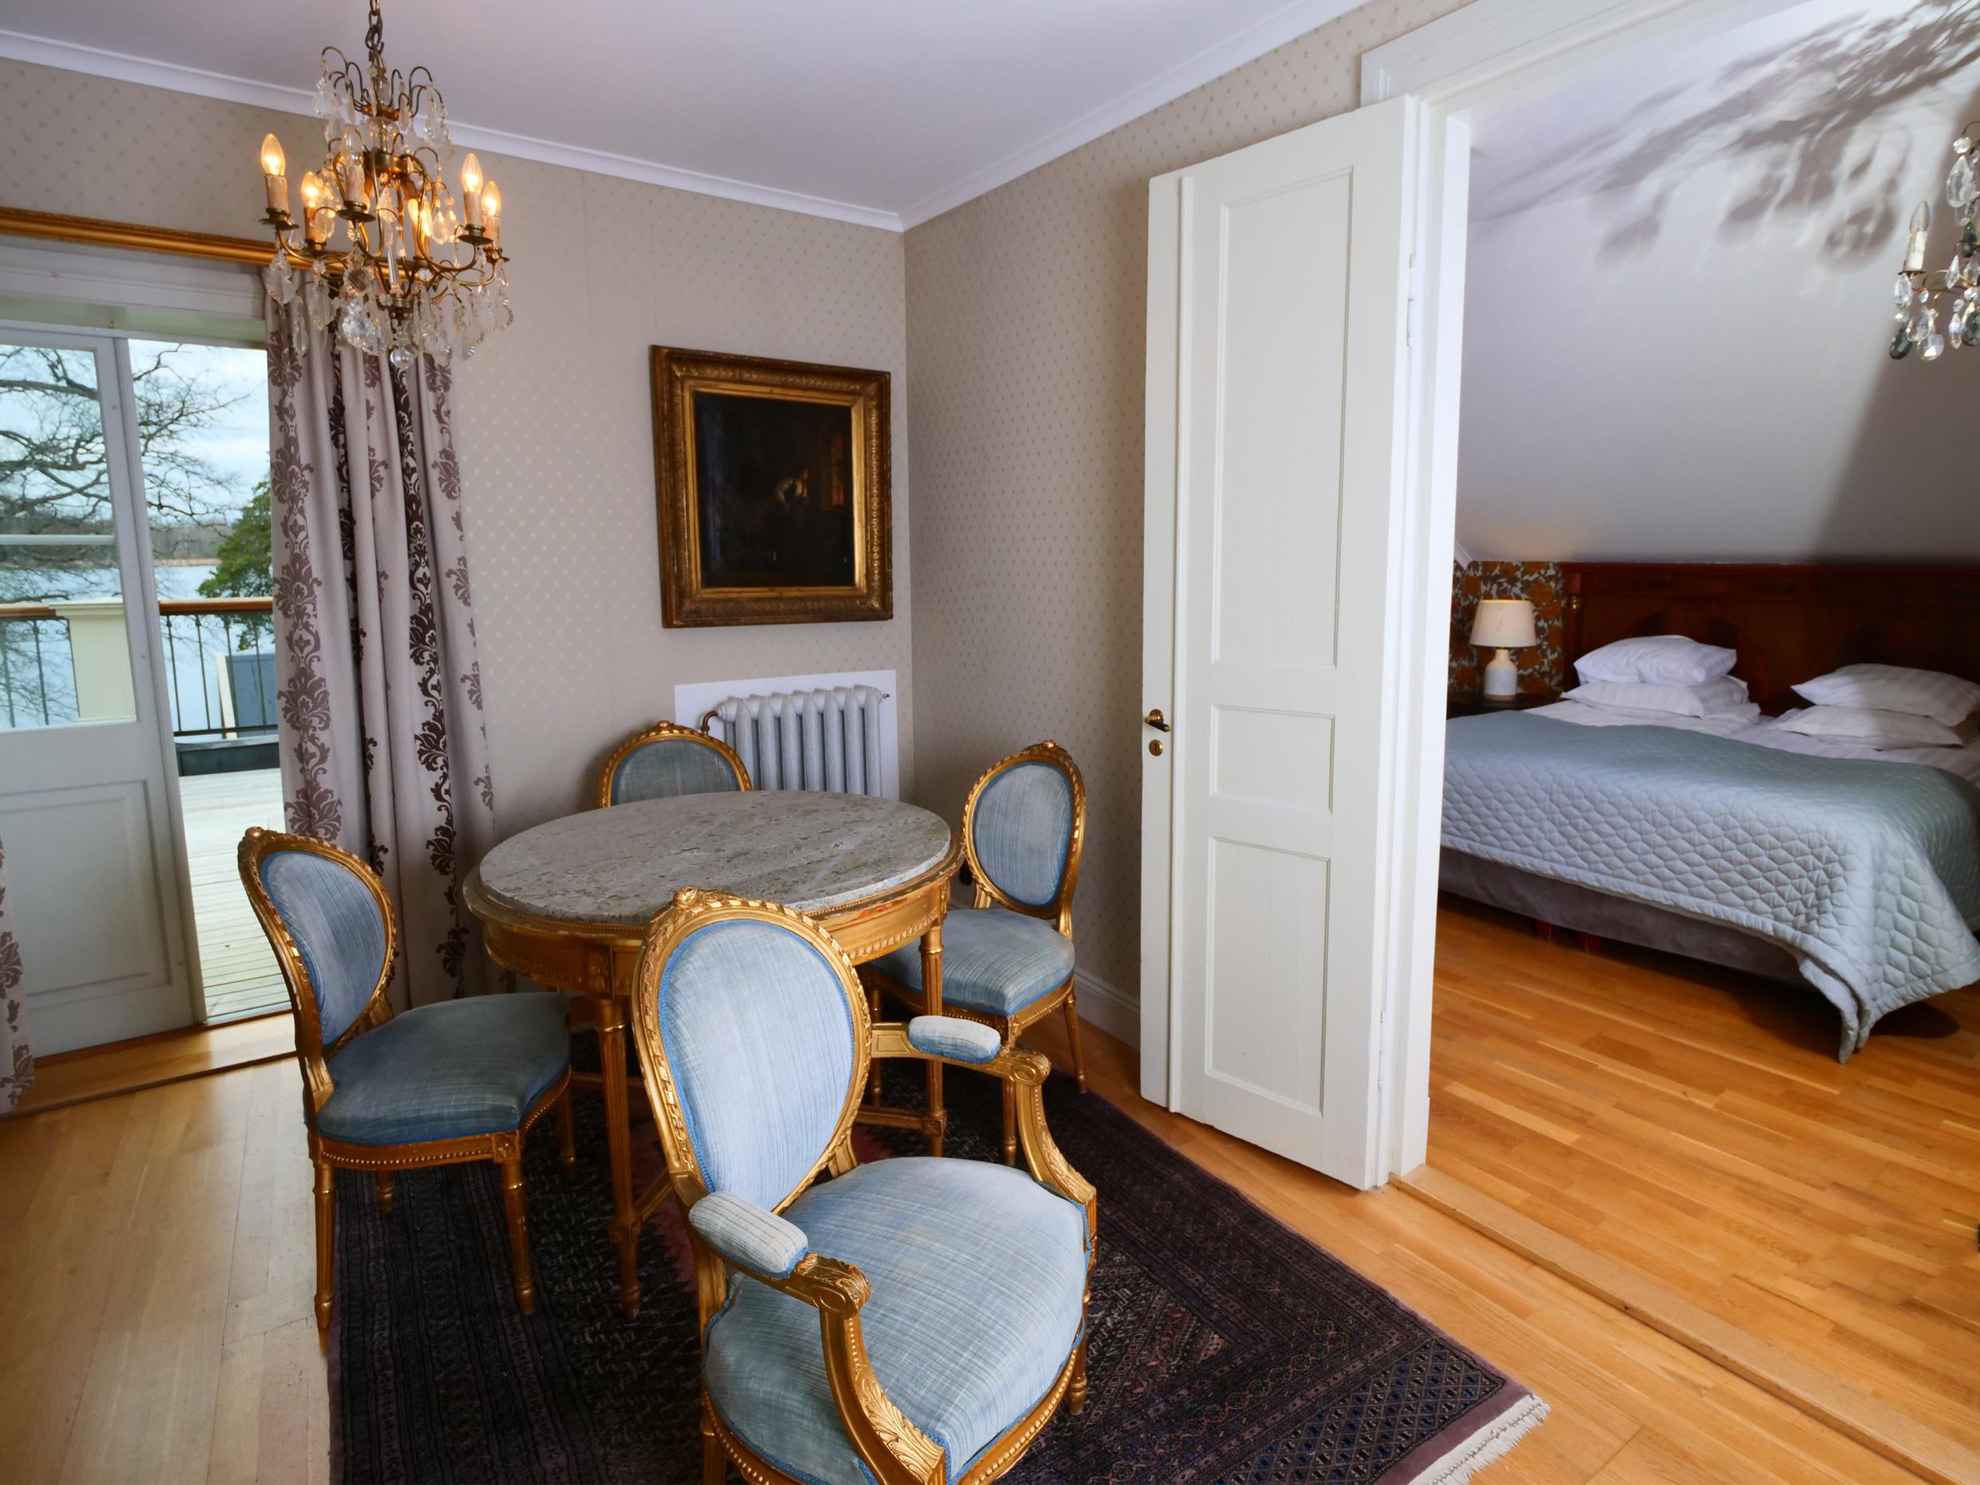 Deluxe Suite at Dufweholms Herrgård